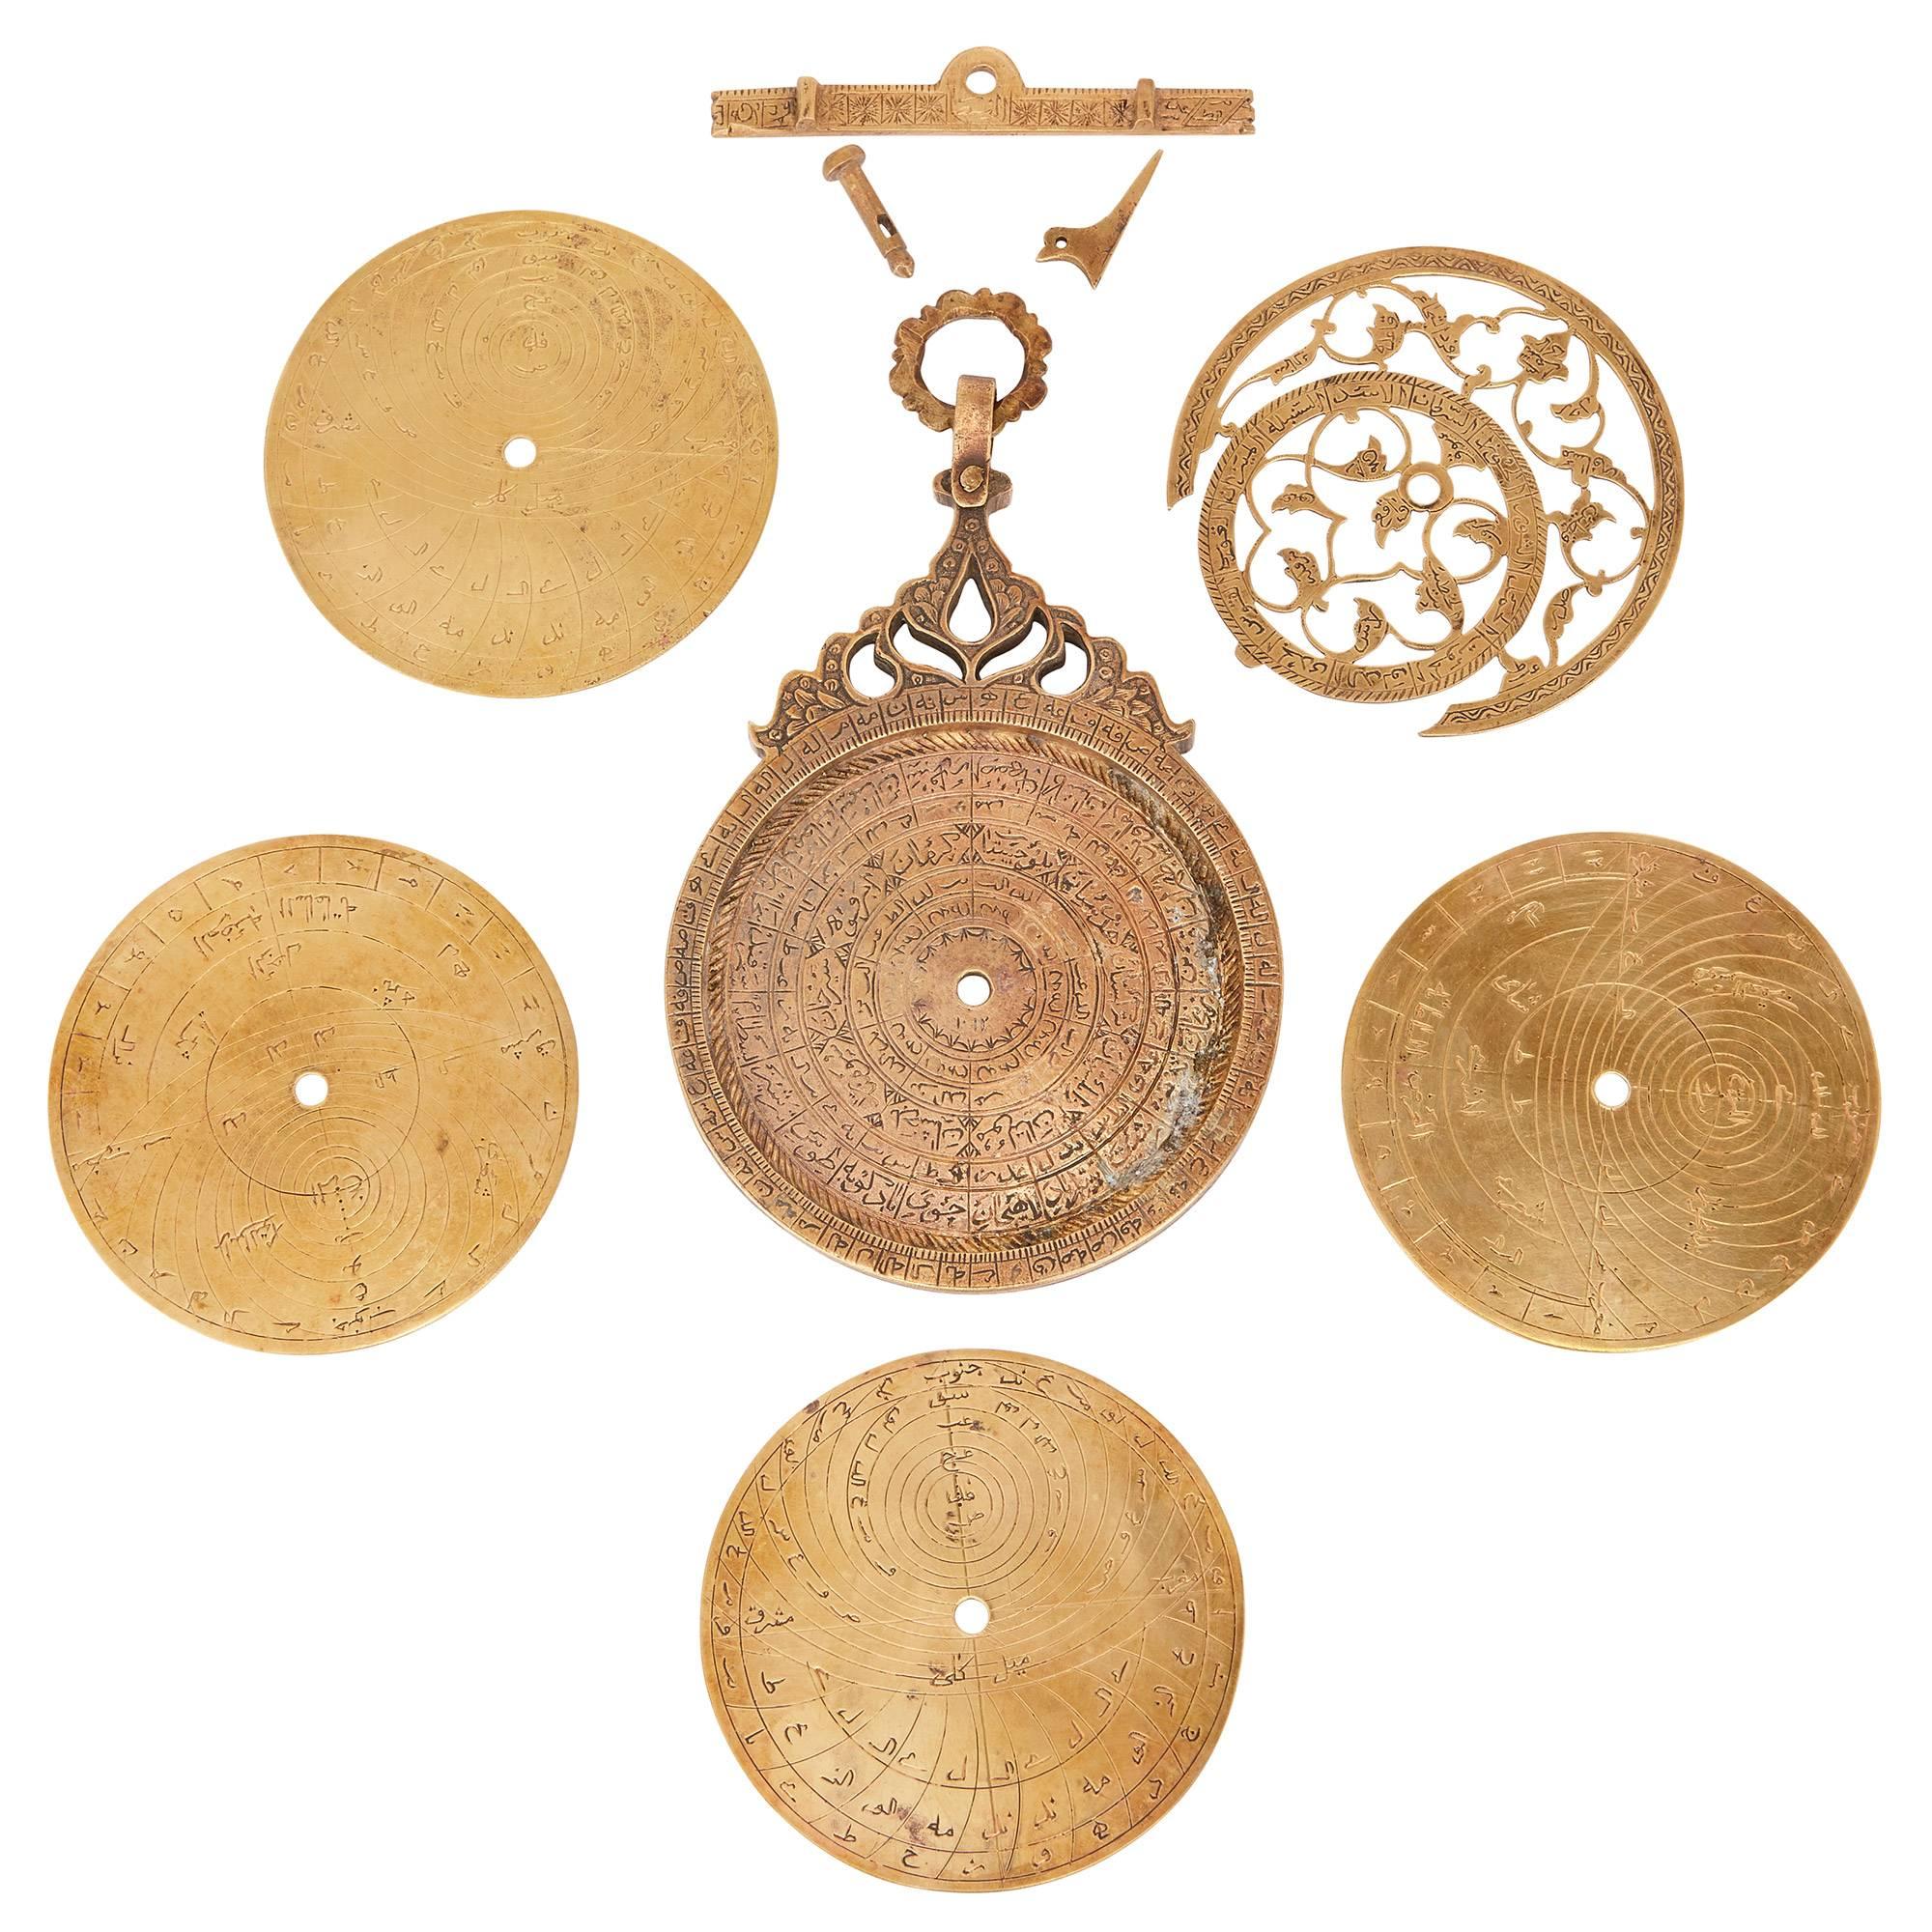 This unusual antique astrolabe is comprised of nine distinct pieces, which include the mater, the rete, four plates and three brass pieces. The mater decorated in the arabesque style, featuring with lobed palmettes and Arabic inscriptions. The